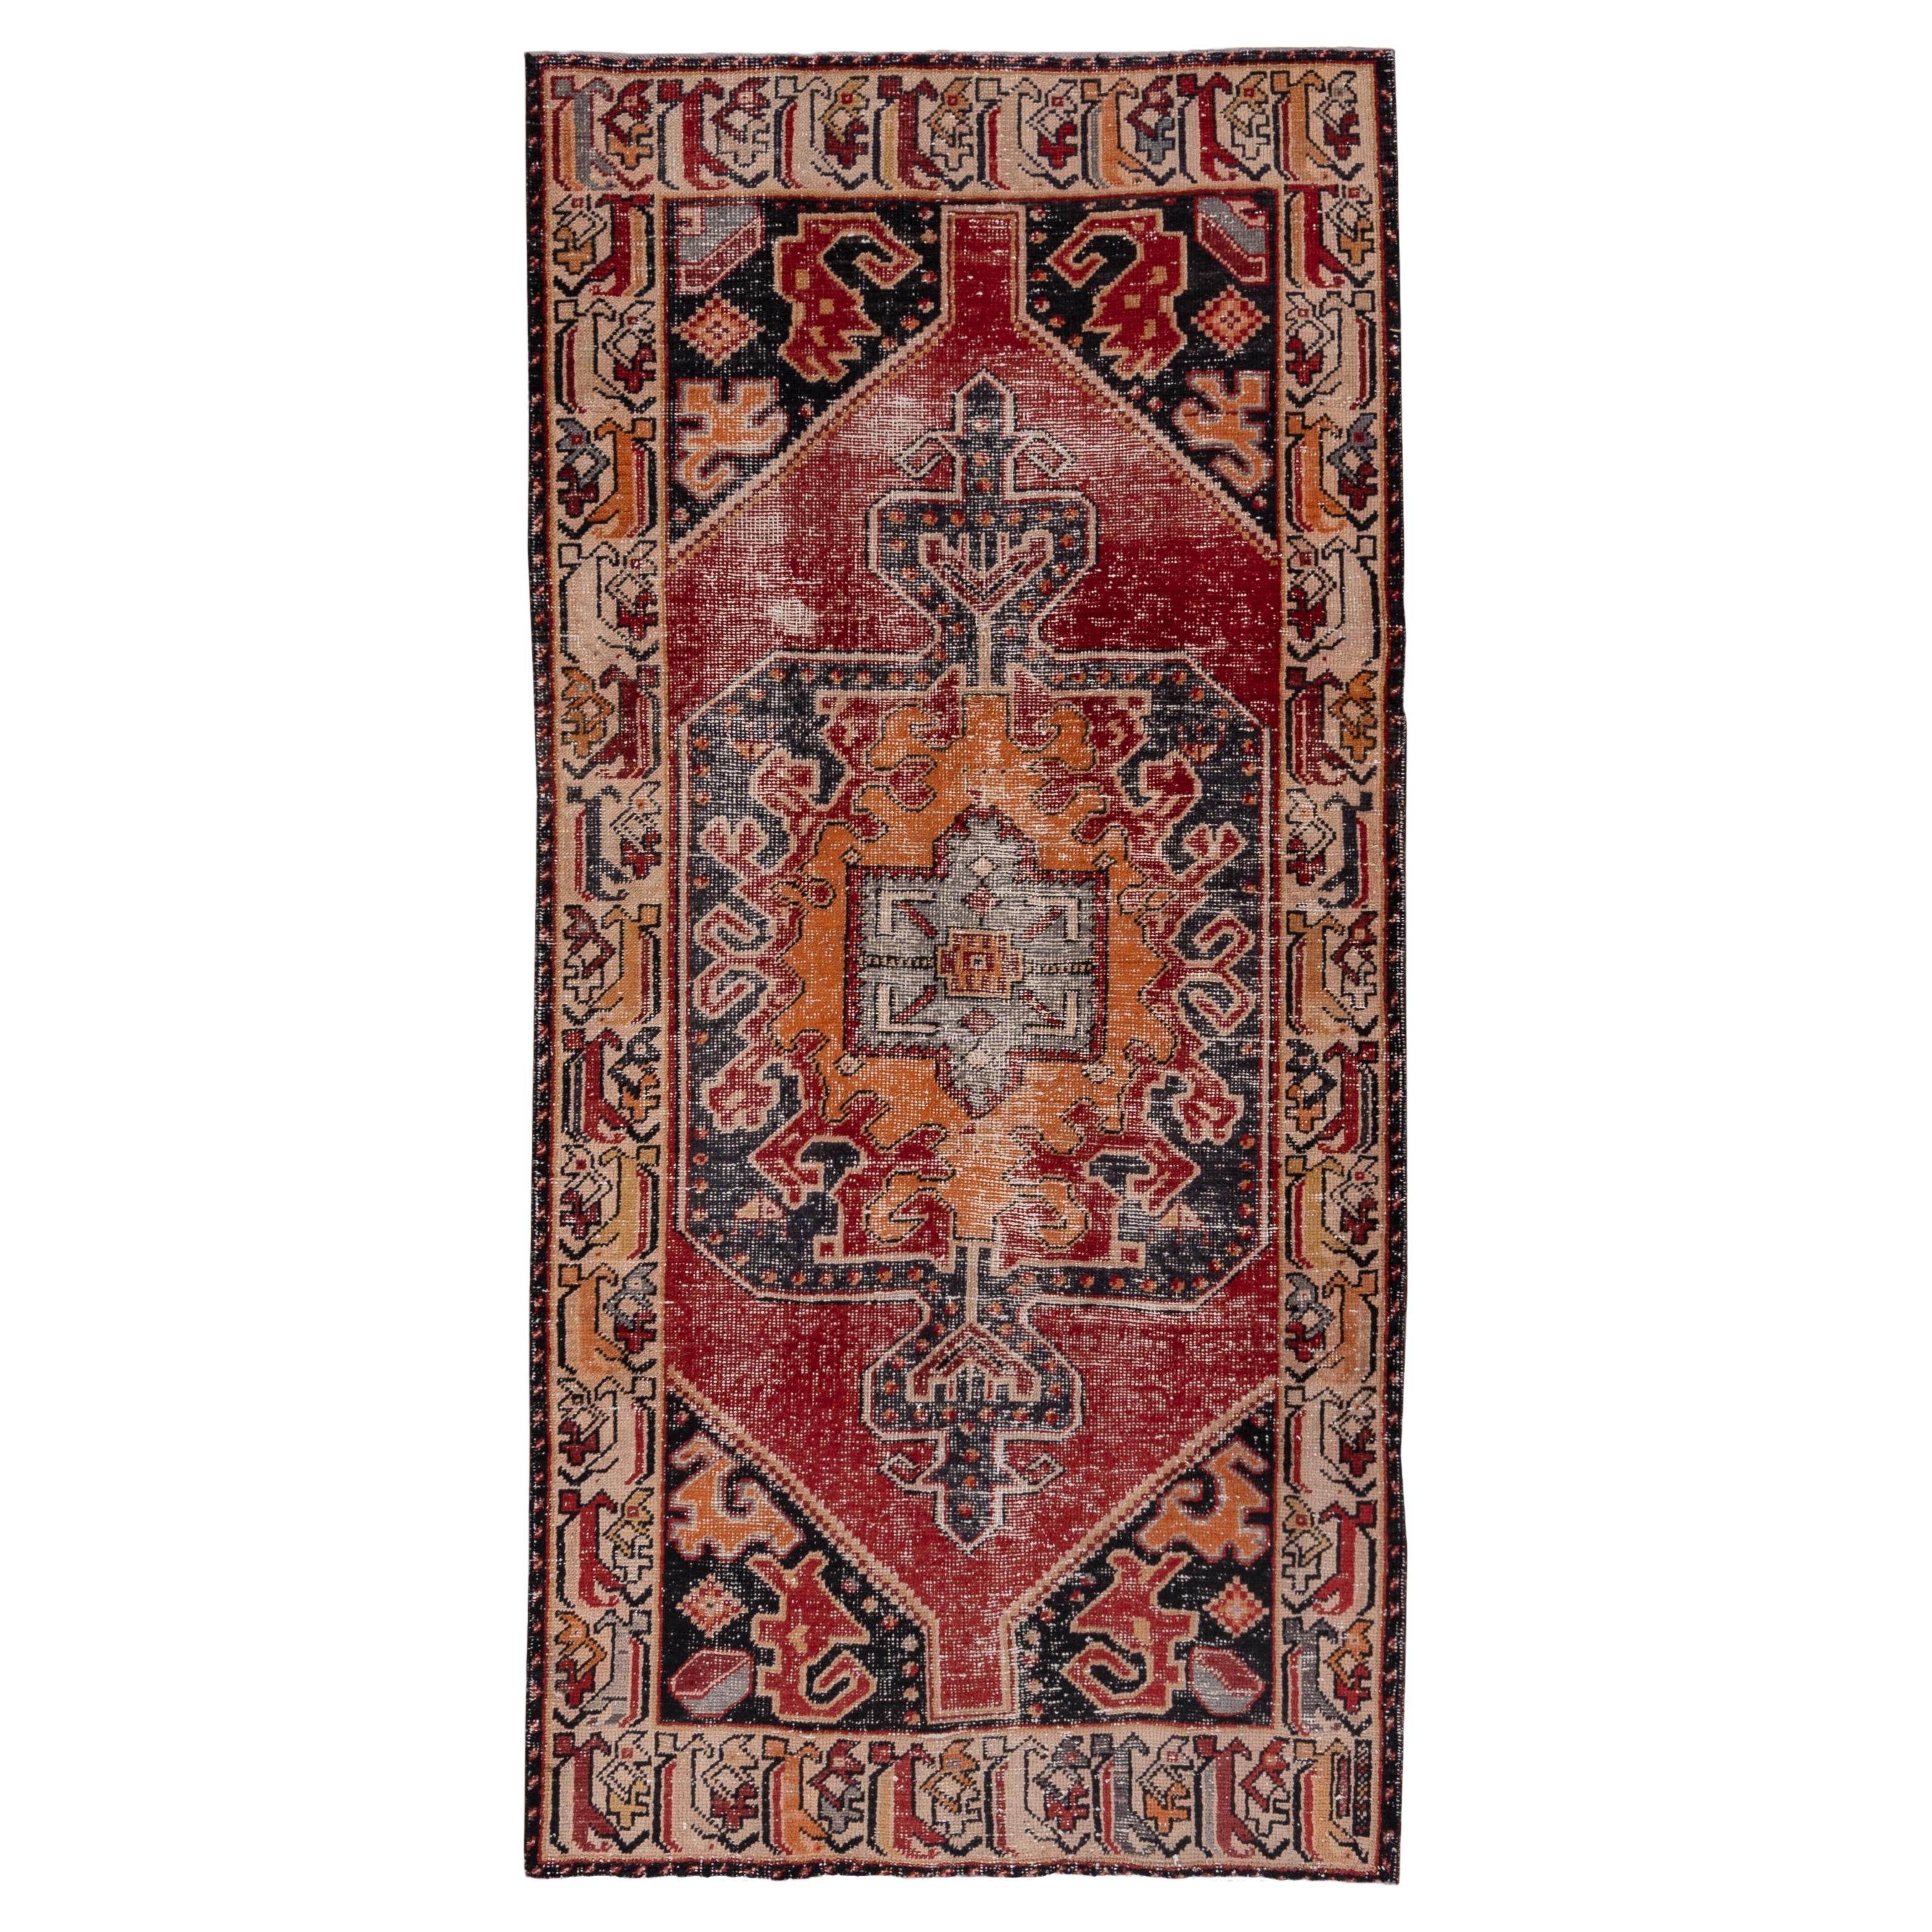 Turkish Shabby Chic Rug 1960 Persian Influence For Sale